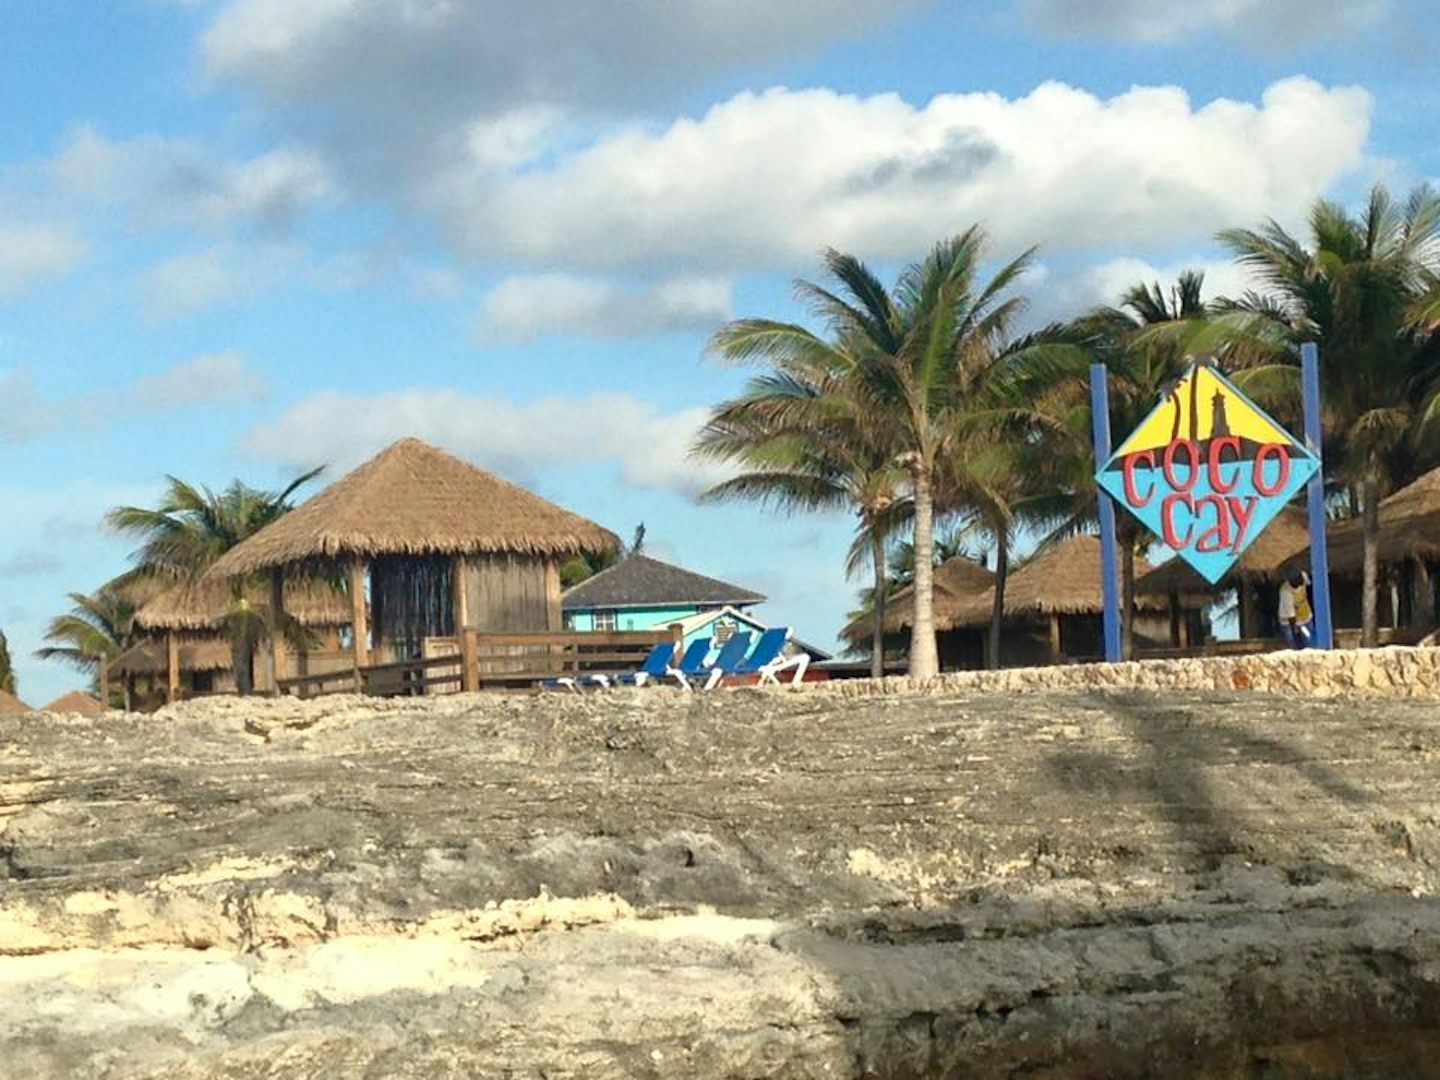 View of our cabana, Cabana #7, and the Coco Cay sign, tendering back to the ship